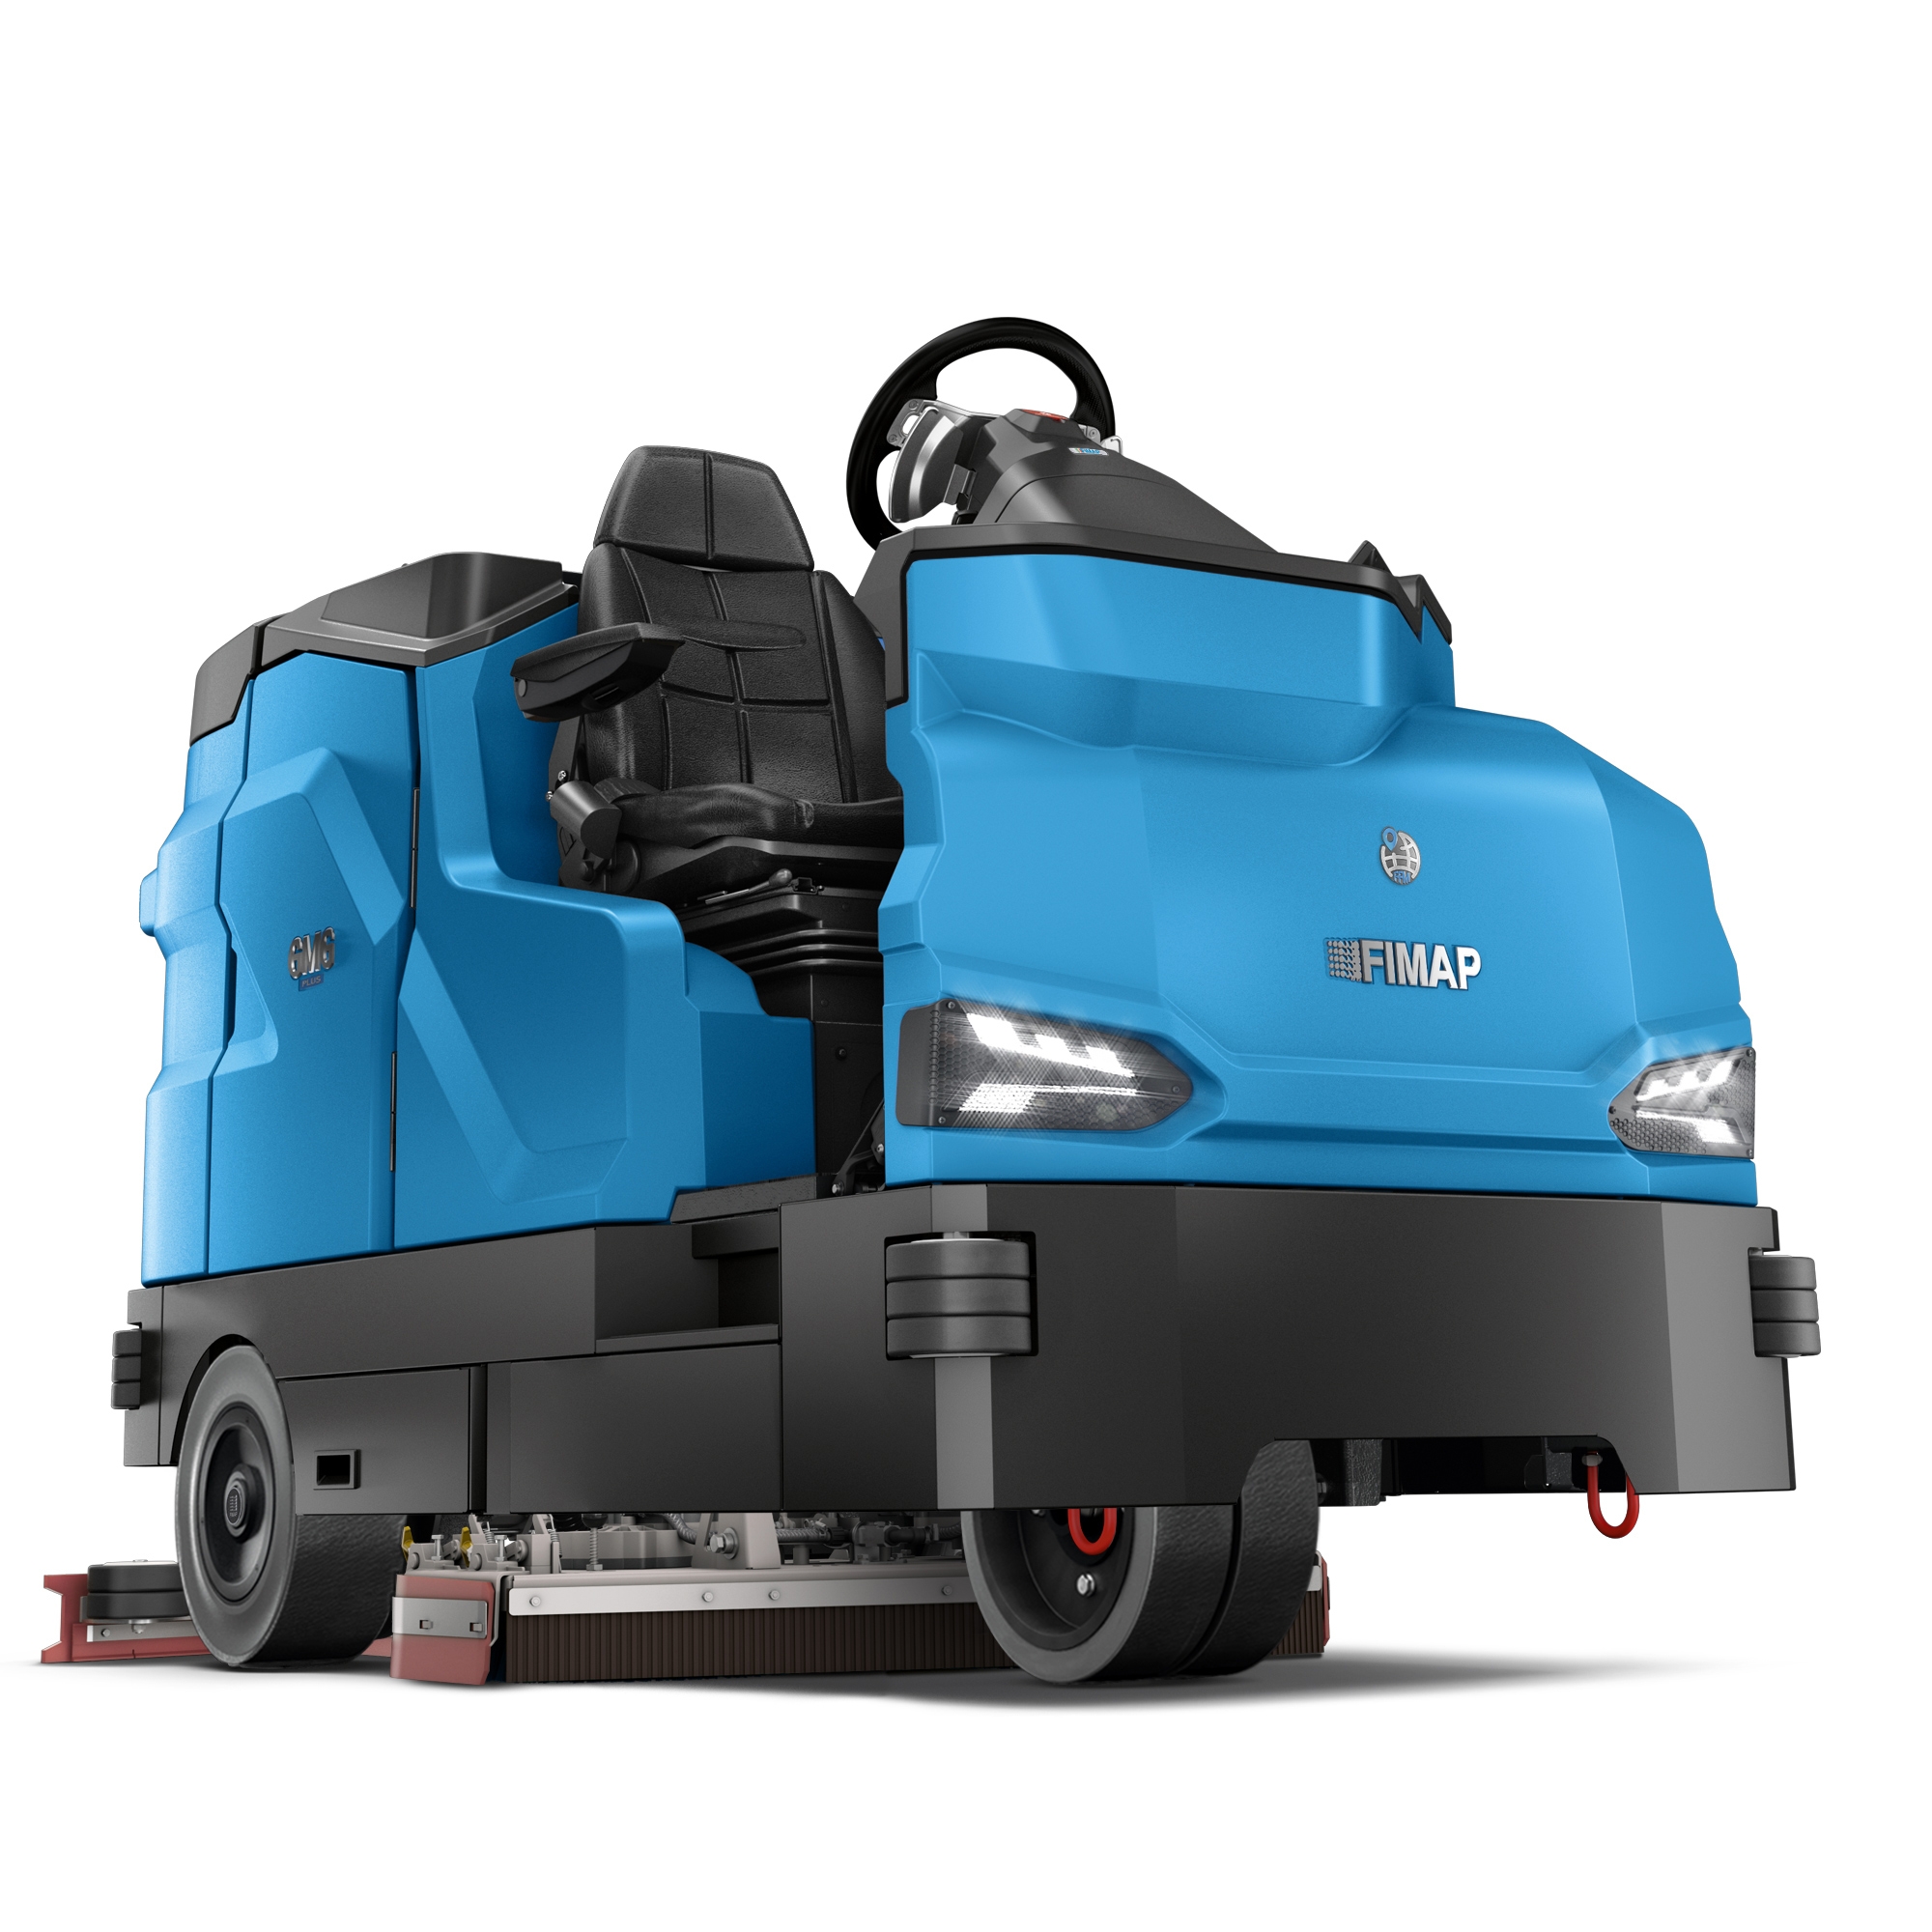 Fimap Gmg Pro Ride-On Scrubber Dryer